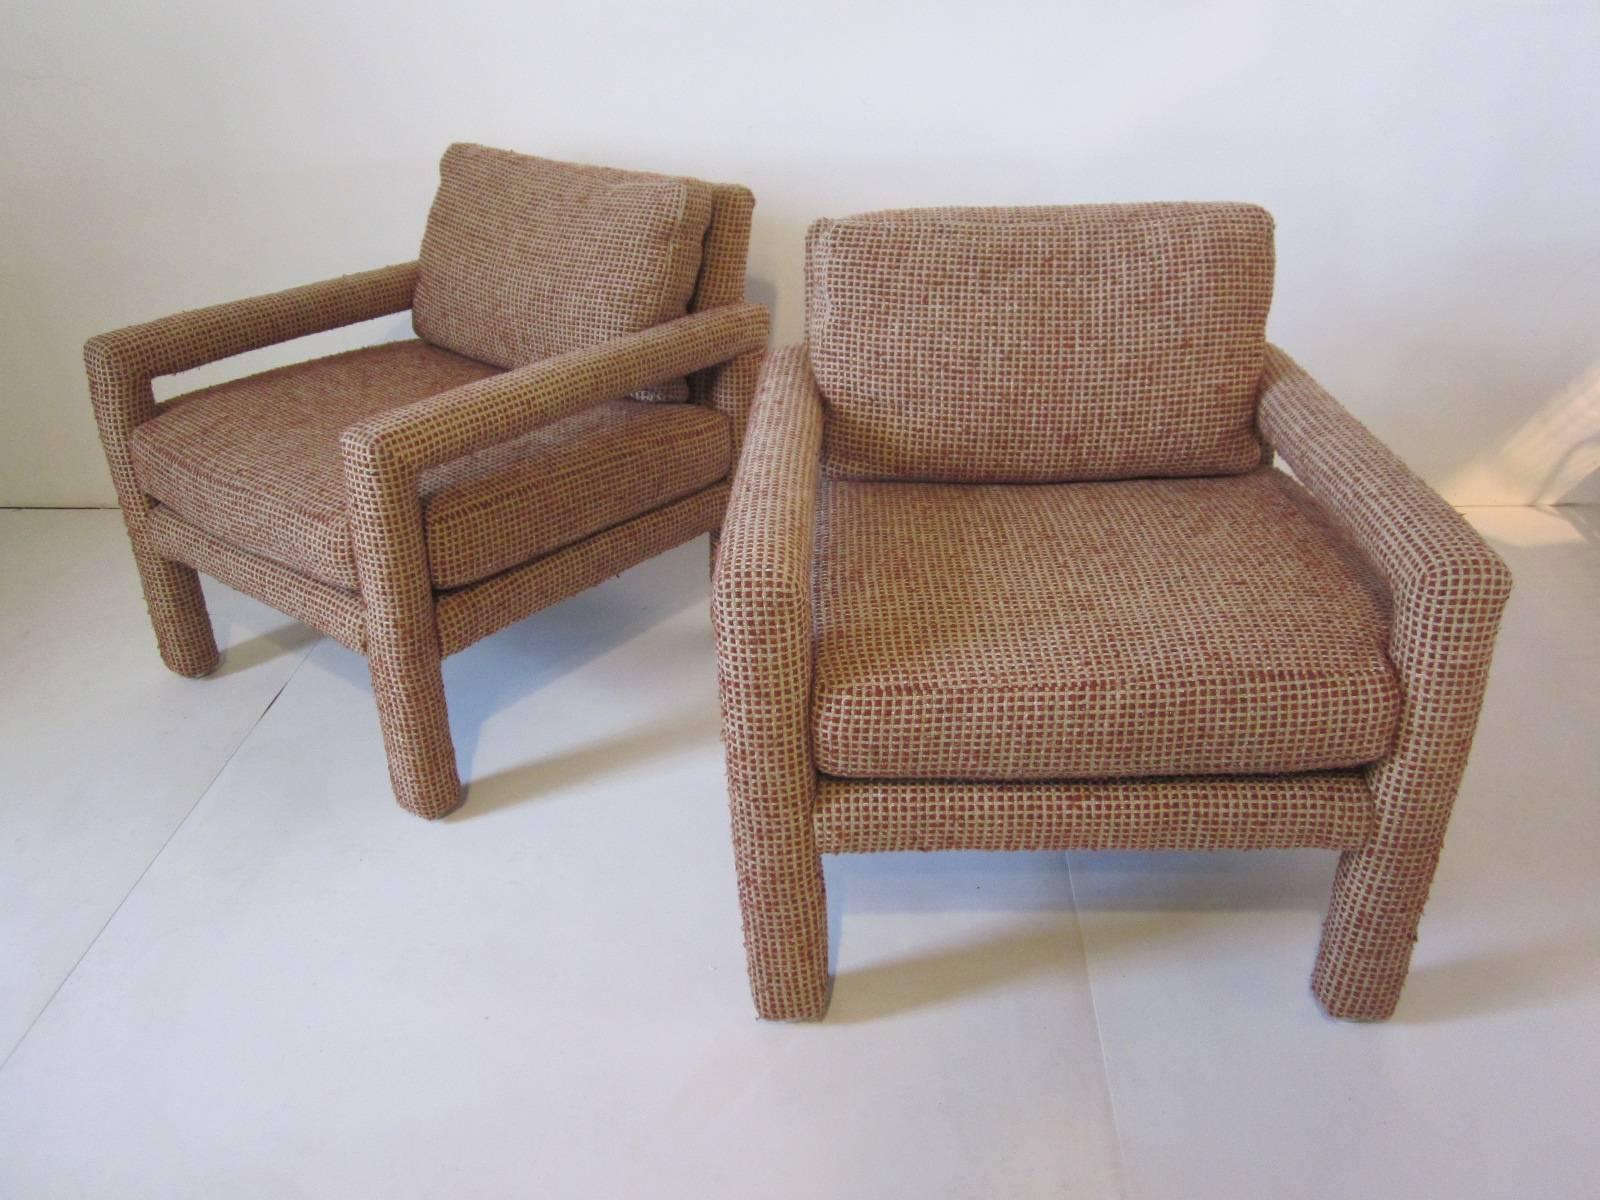 A pair of upholstered Parson styled club chairs in a natural woven raw cotton fiber with small checked patterns in a cream and clay color, manufactured by the Drexel Heritage Furniture company.